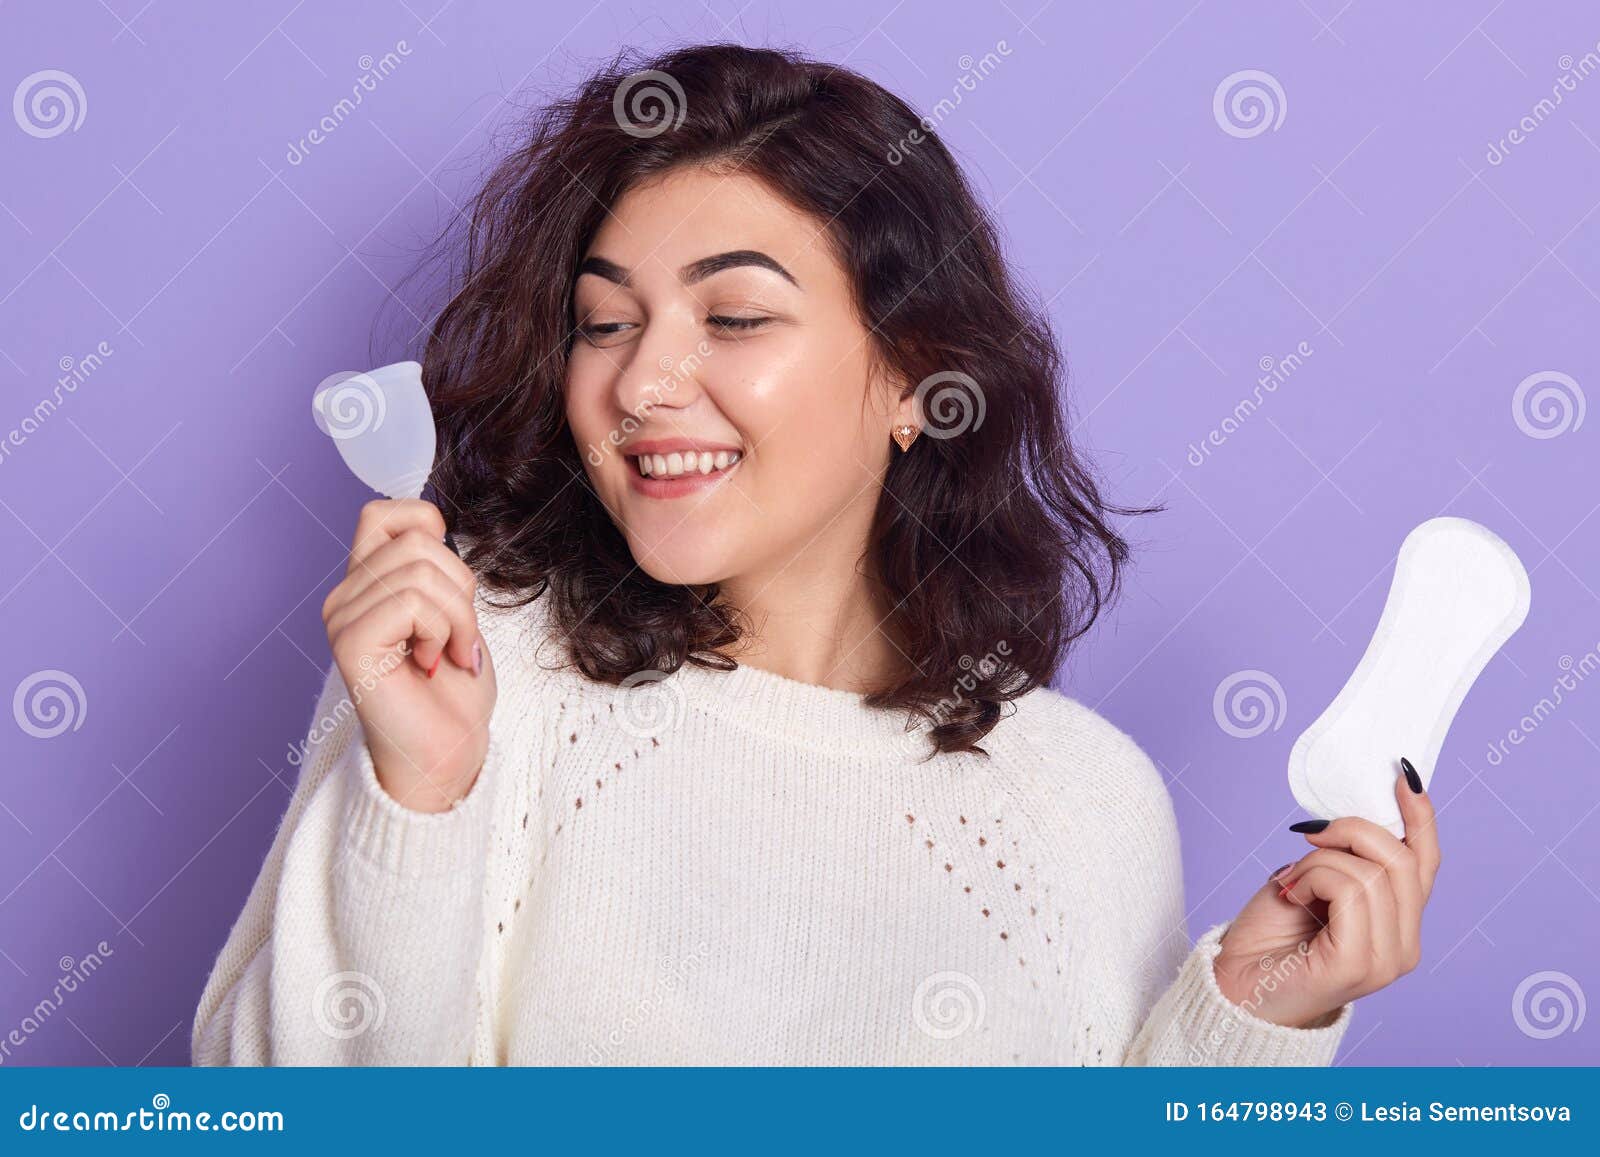 woman holding menstrual cup and sanitary pad in hands. feminine hygiene alternative product instead of tampon during her period.